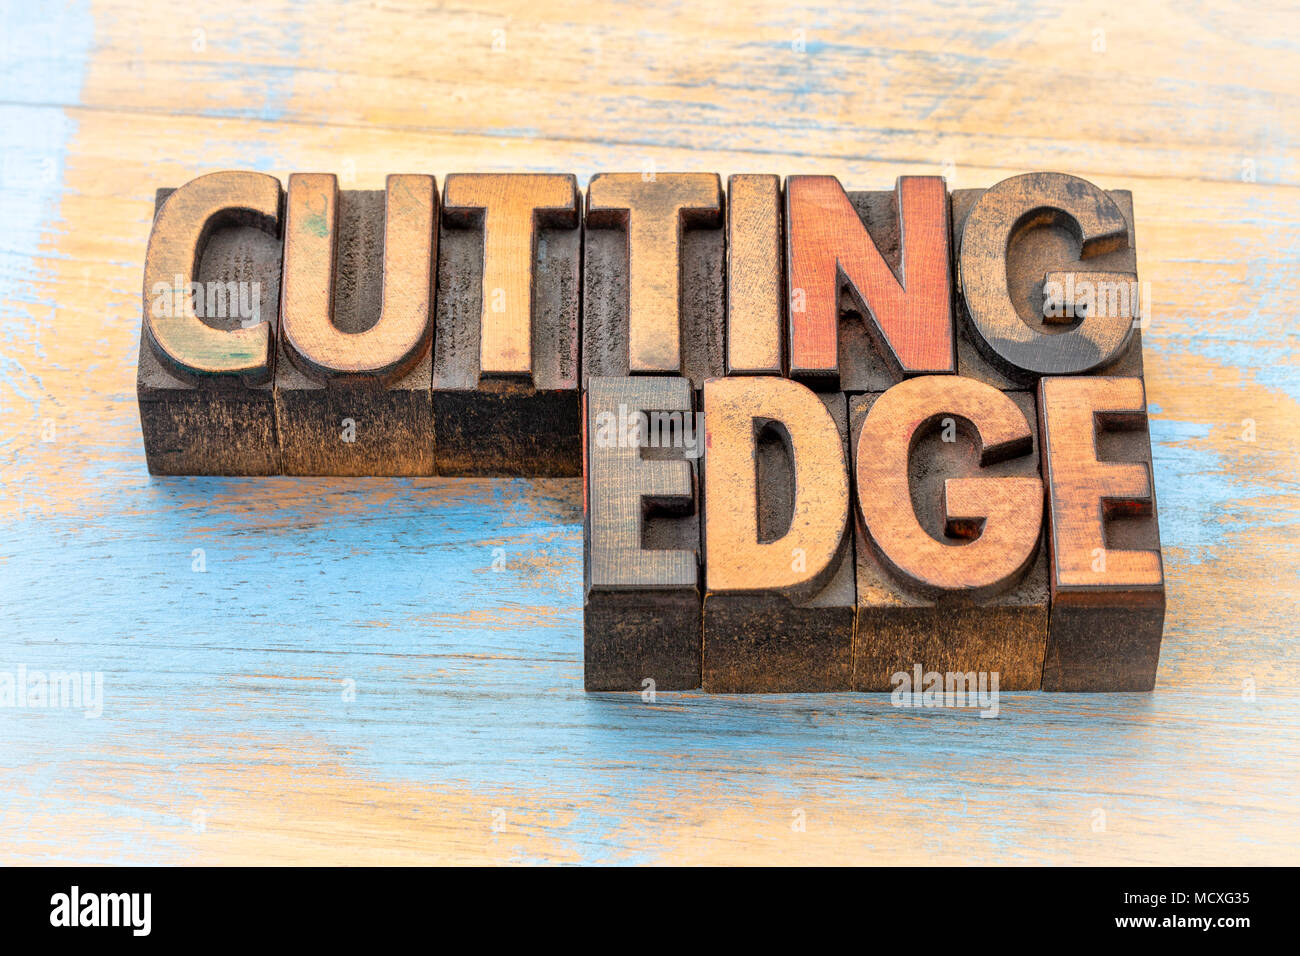 cutting edge word abstract in vintage letterpress wood type Stock Photo